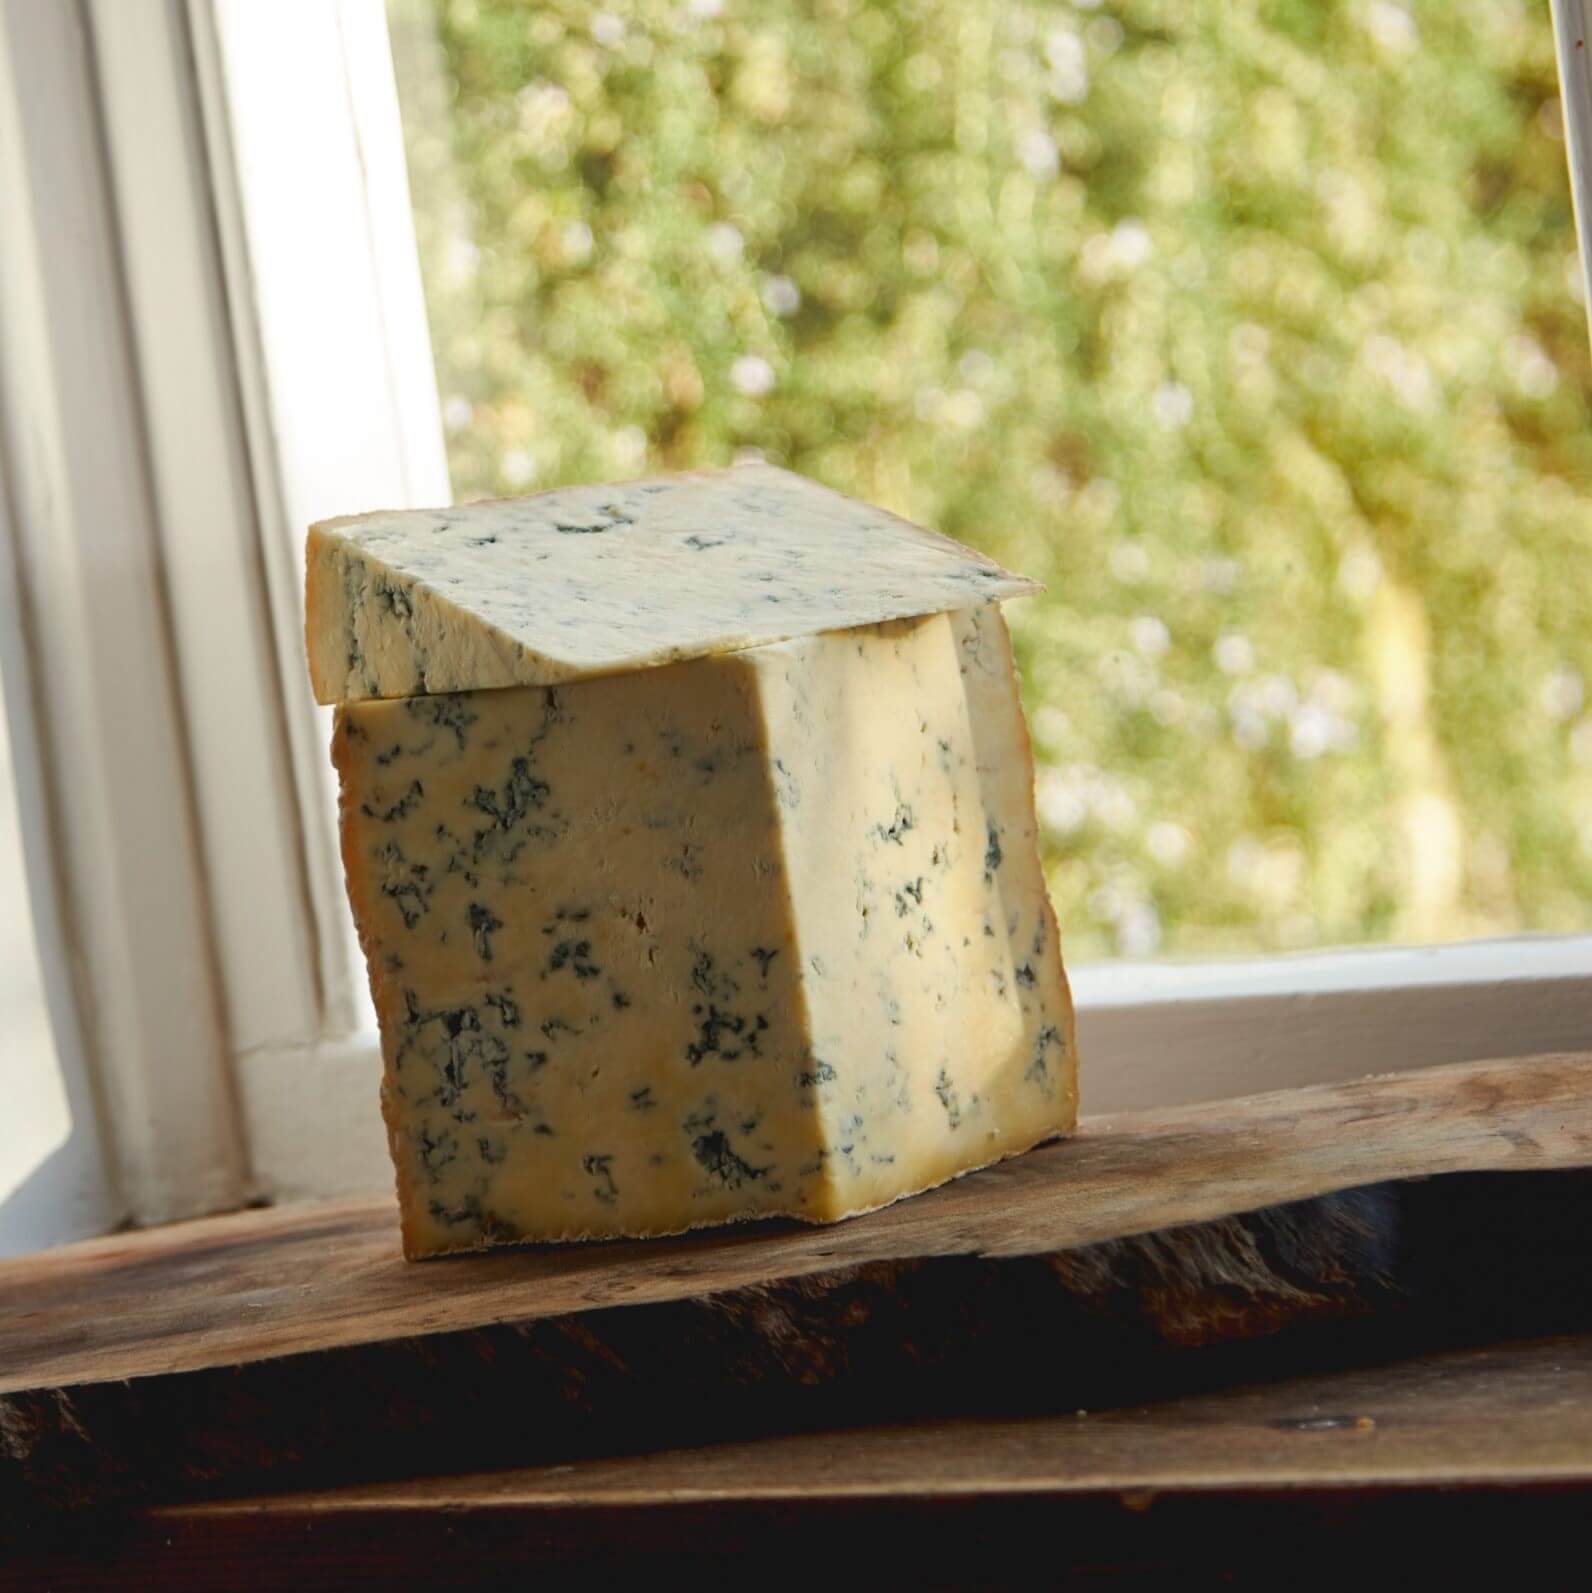 Image of Bath Blue Cheese made in the UK by The Bath Soft Cheese Co.. Buying this product supports a UK business, jobs and the local community